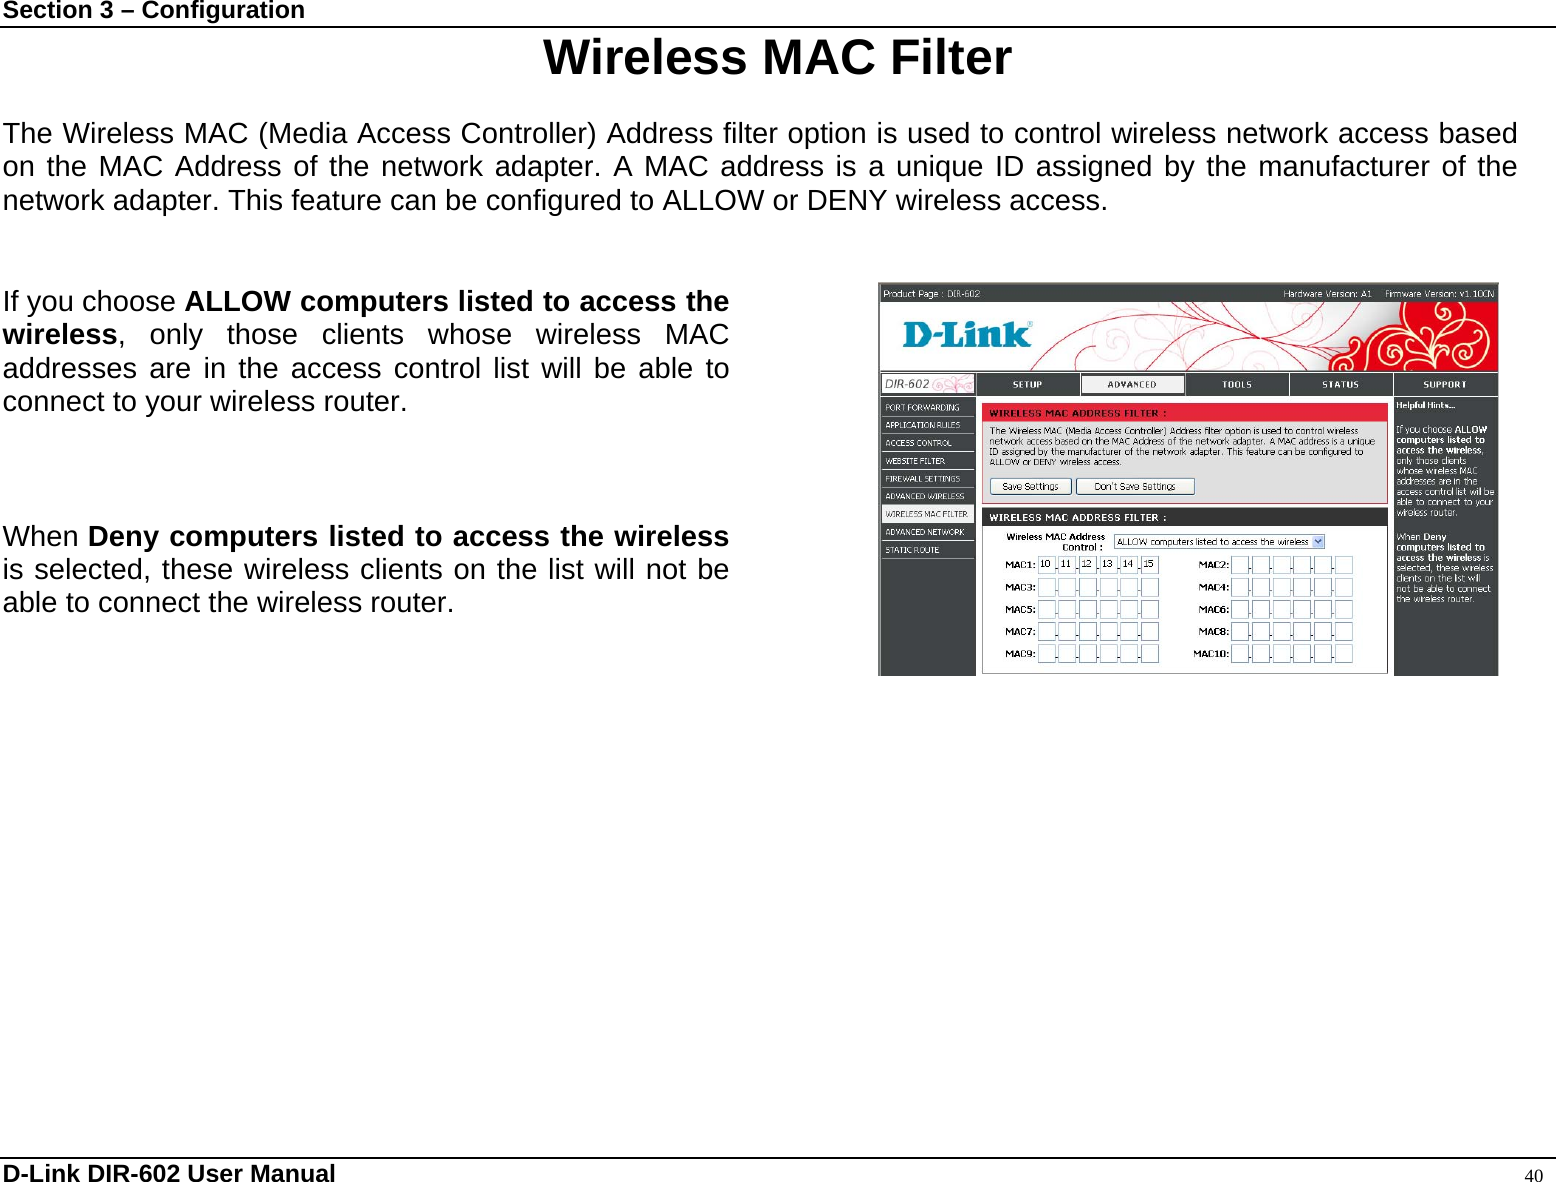 Section 3 – Configuration  Wireless MAC Filter  The Wireless MAC (Media Access Controller) Address filter option is used to control wireless network access based on the MAC Address of the network adapter. A MAC address is a unique ID assigned by the manufacturer of the network adapter. This feature can be configured to ALLOW or DENY wireless access.   If you choose ALLOW computers listed to access the wireless, only those clients whose wireless MAC addresses are in the access control list will be able to connect to your wireless router.      When Deny computers listed to access the wireless is selected, these wireless clients on the list will not be able to connect the wireless router.       D-Link DIR-602 User Manual                                                                                               40 